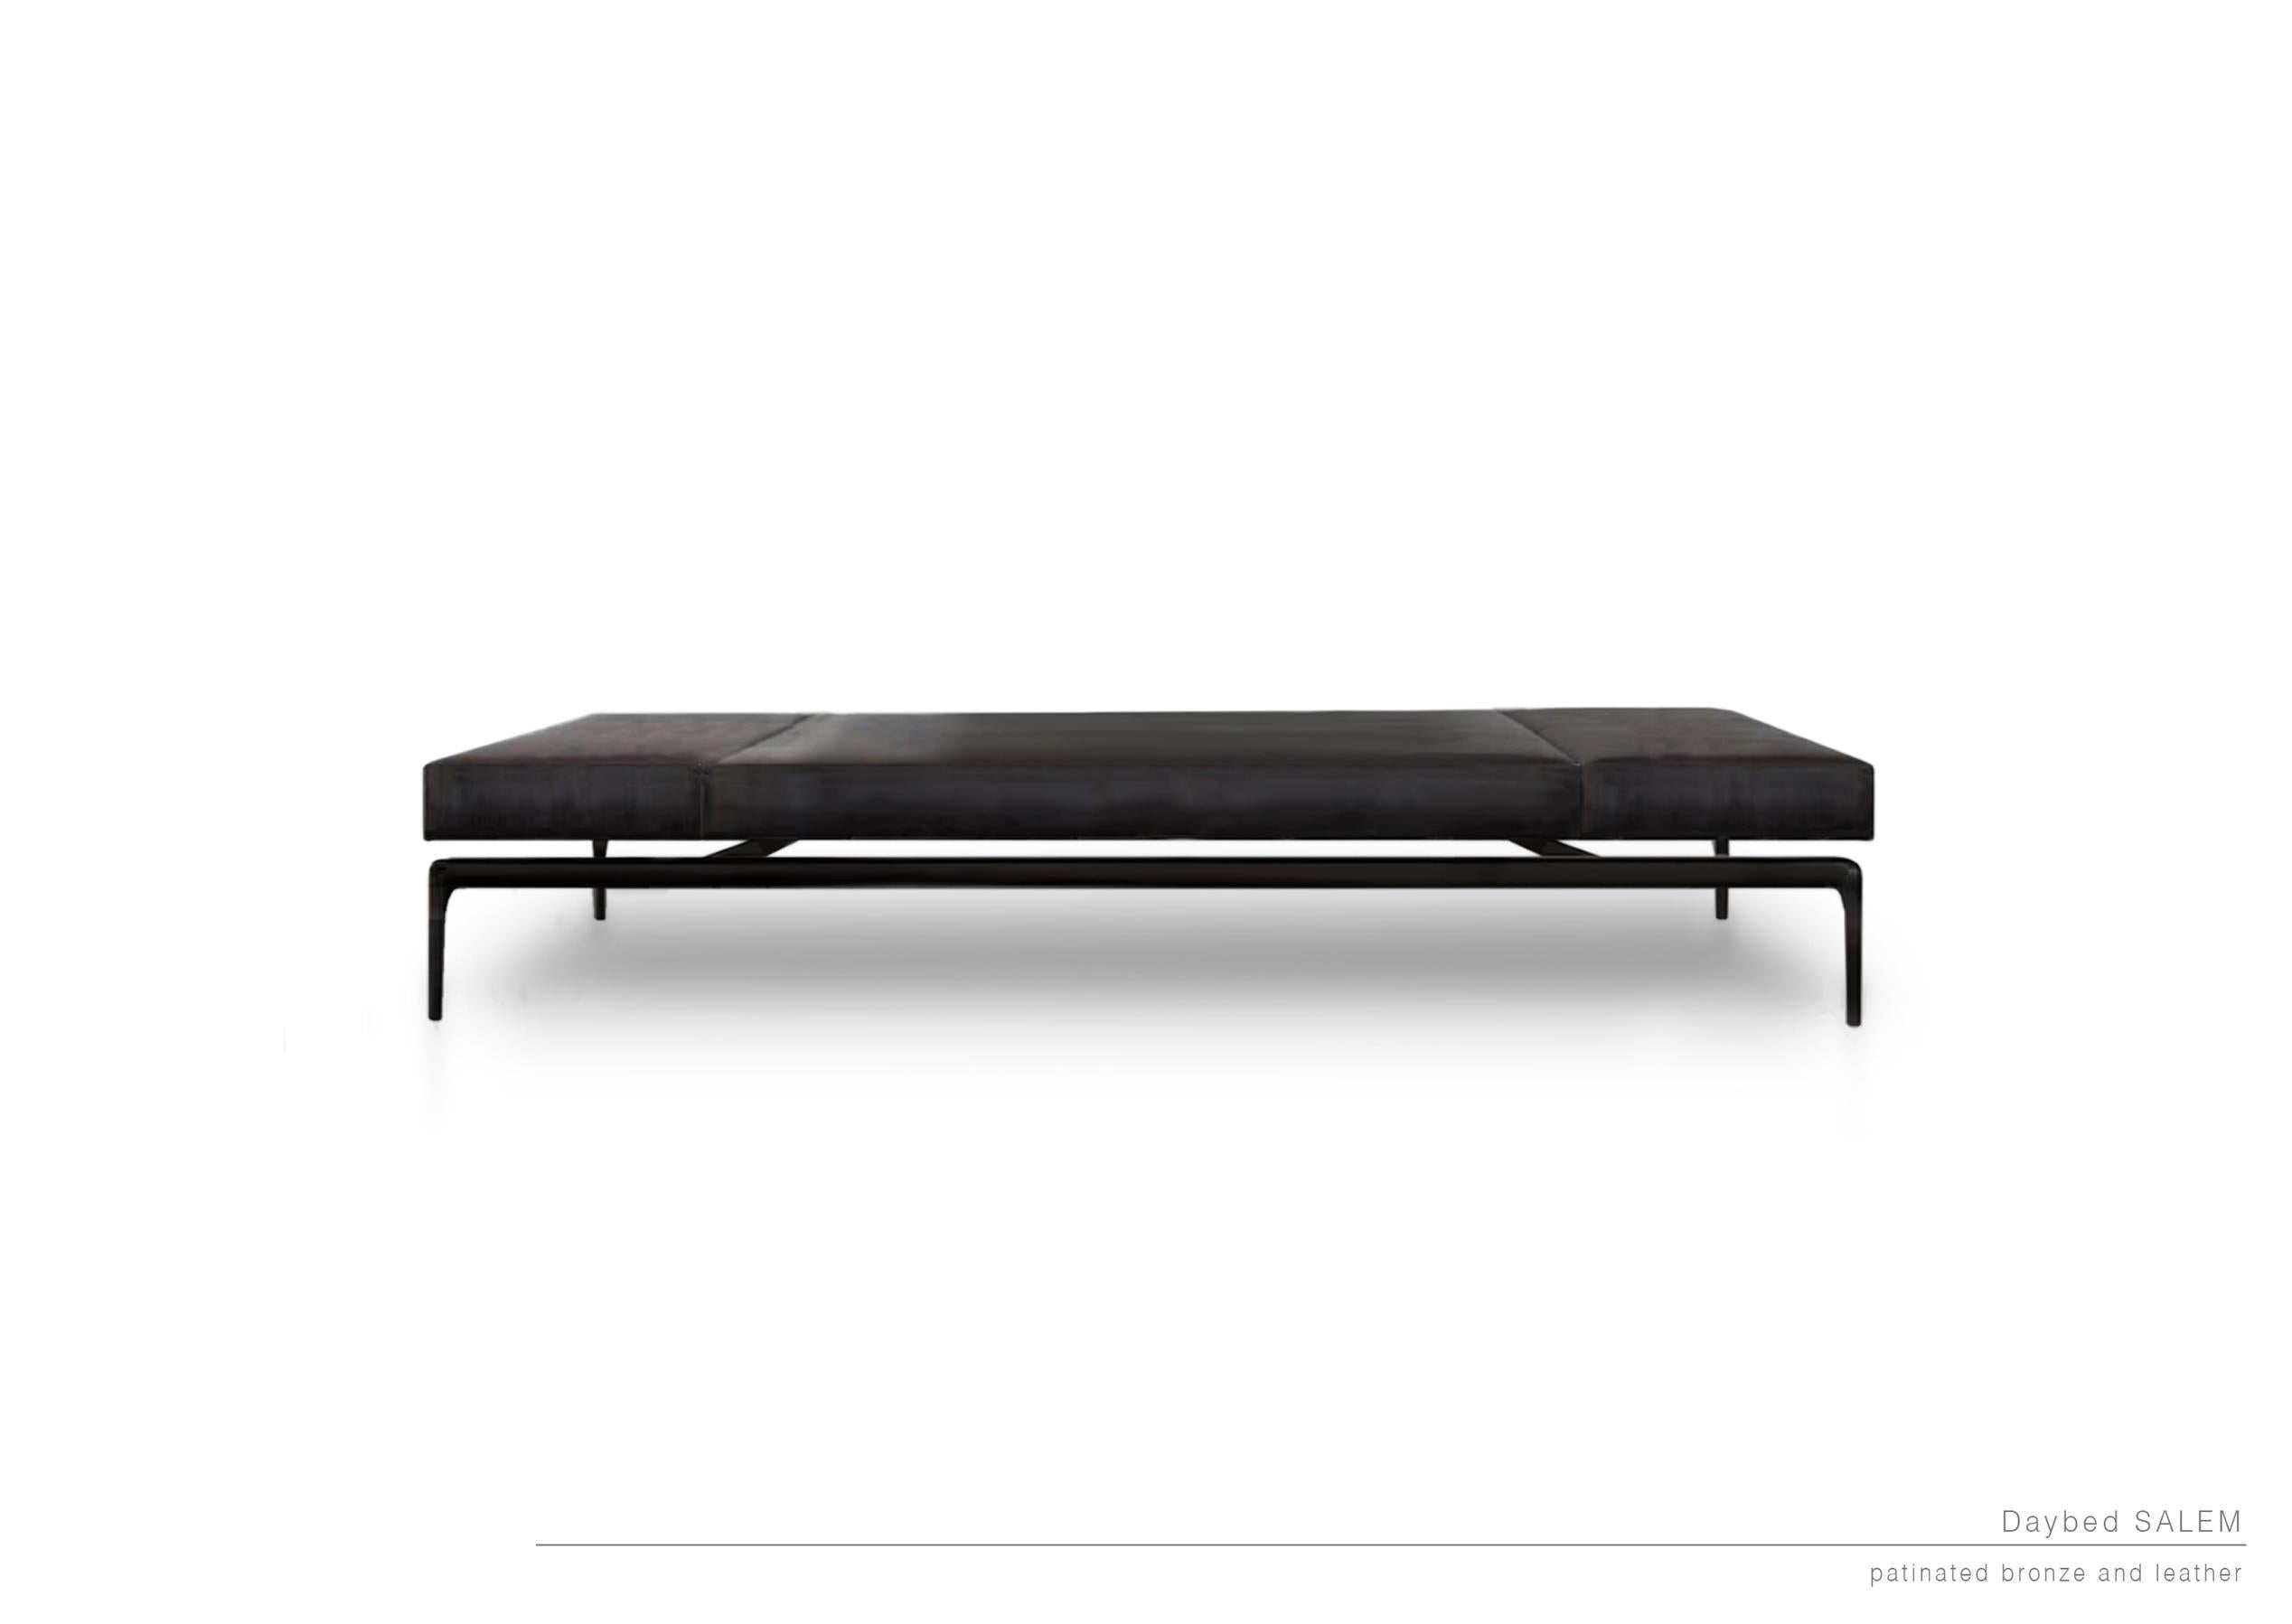 Salem daybed by LK Edition
Dimensions: 170 x 80 x H 40 cm
Materials: Leather and patinated bronze. 

It is with the sense of detail and requirement, this research of the exception by the selection of noble materials and his culture of the French